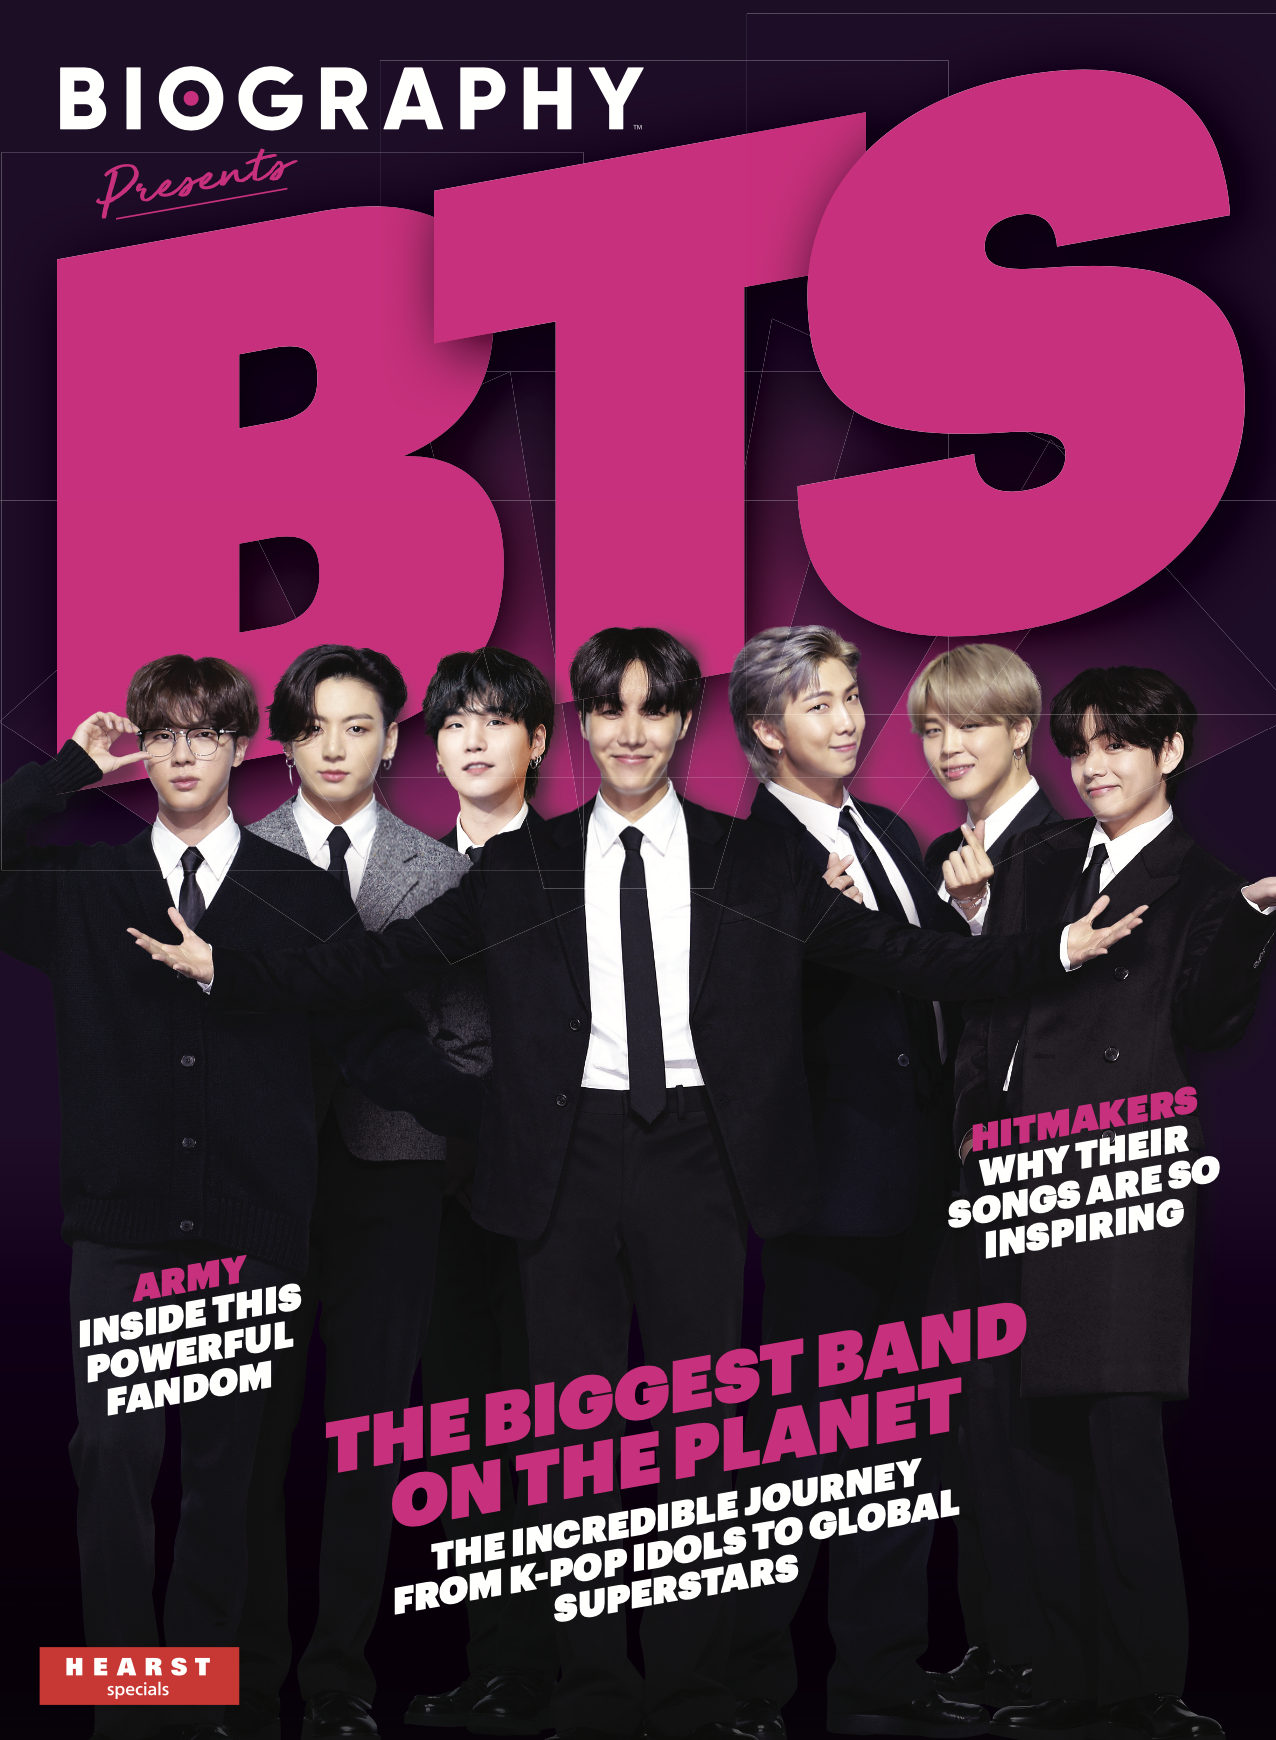 Epic Stuff - BTS Wall Poster A3 Size (12 x 18 inches) (Without Frame) -  Best Gifts For BTS Fans/BTS Fandom/Great Accessory For Home & Decor…  (Gradient) : Amazon.in: Home & Kitchen